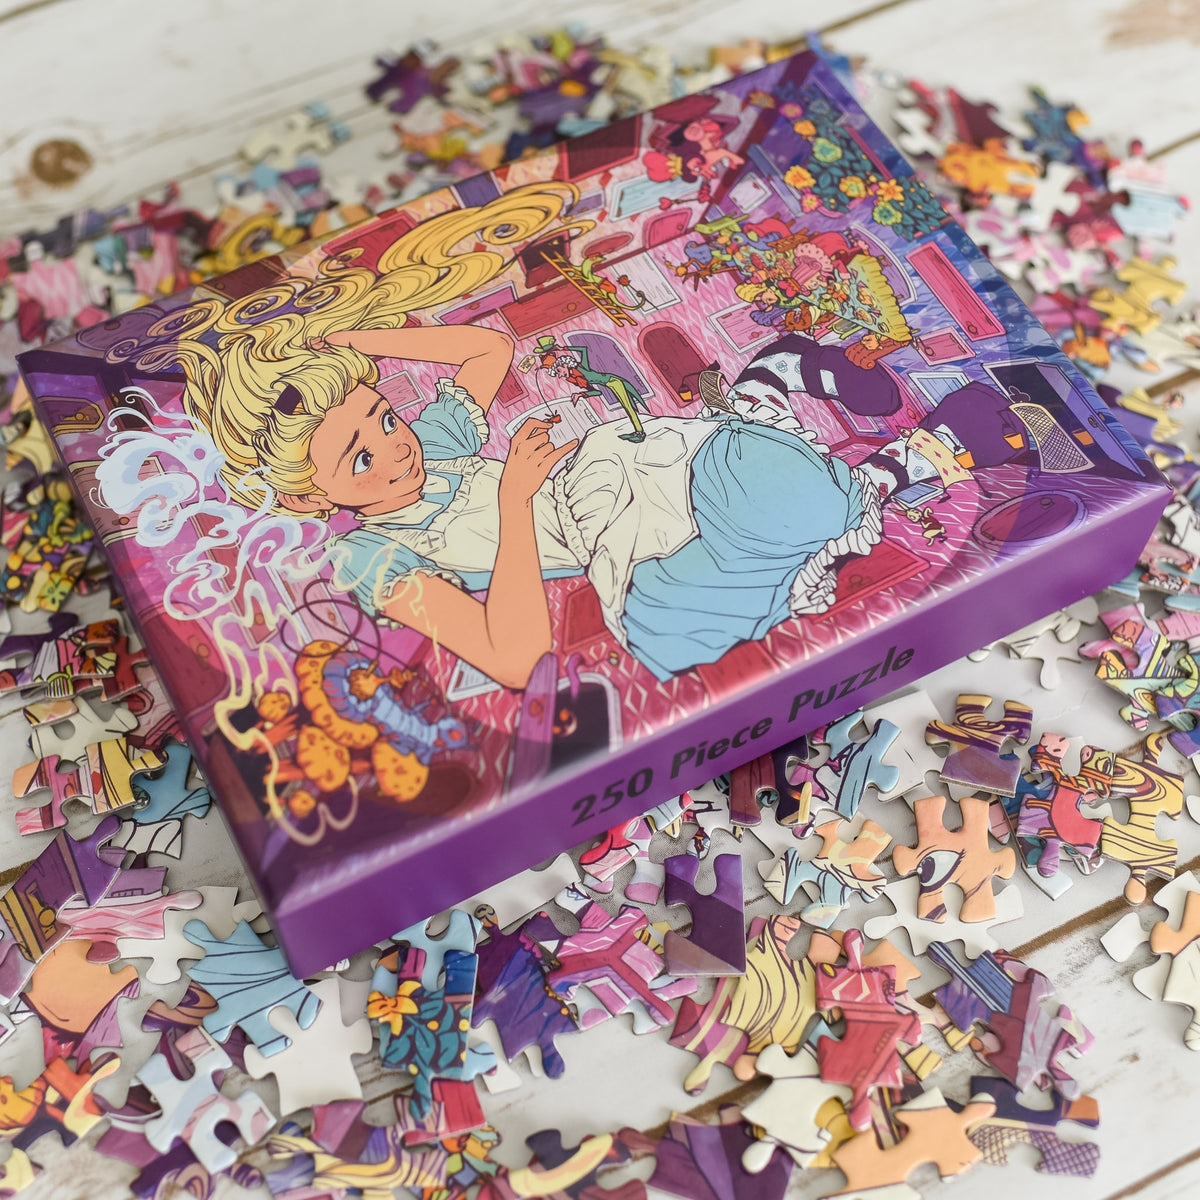 Wonderland Puzzle includes Alice in a blue dress hunched over as details from the books close in on her.